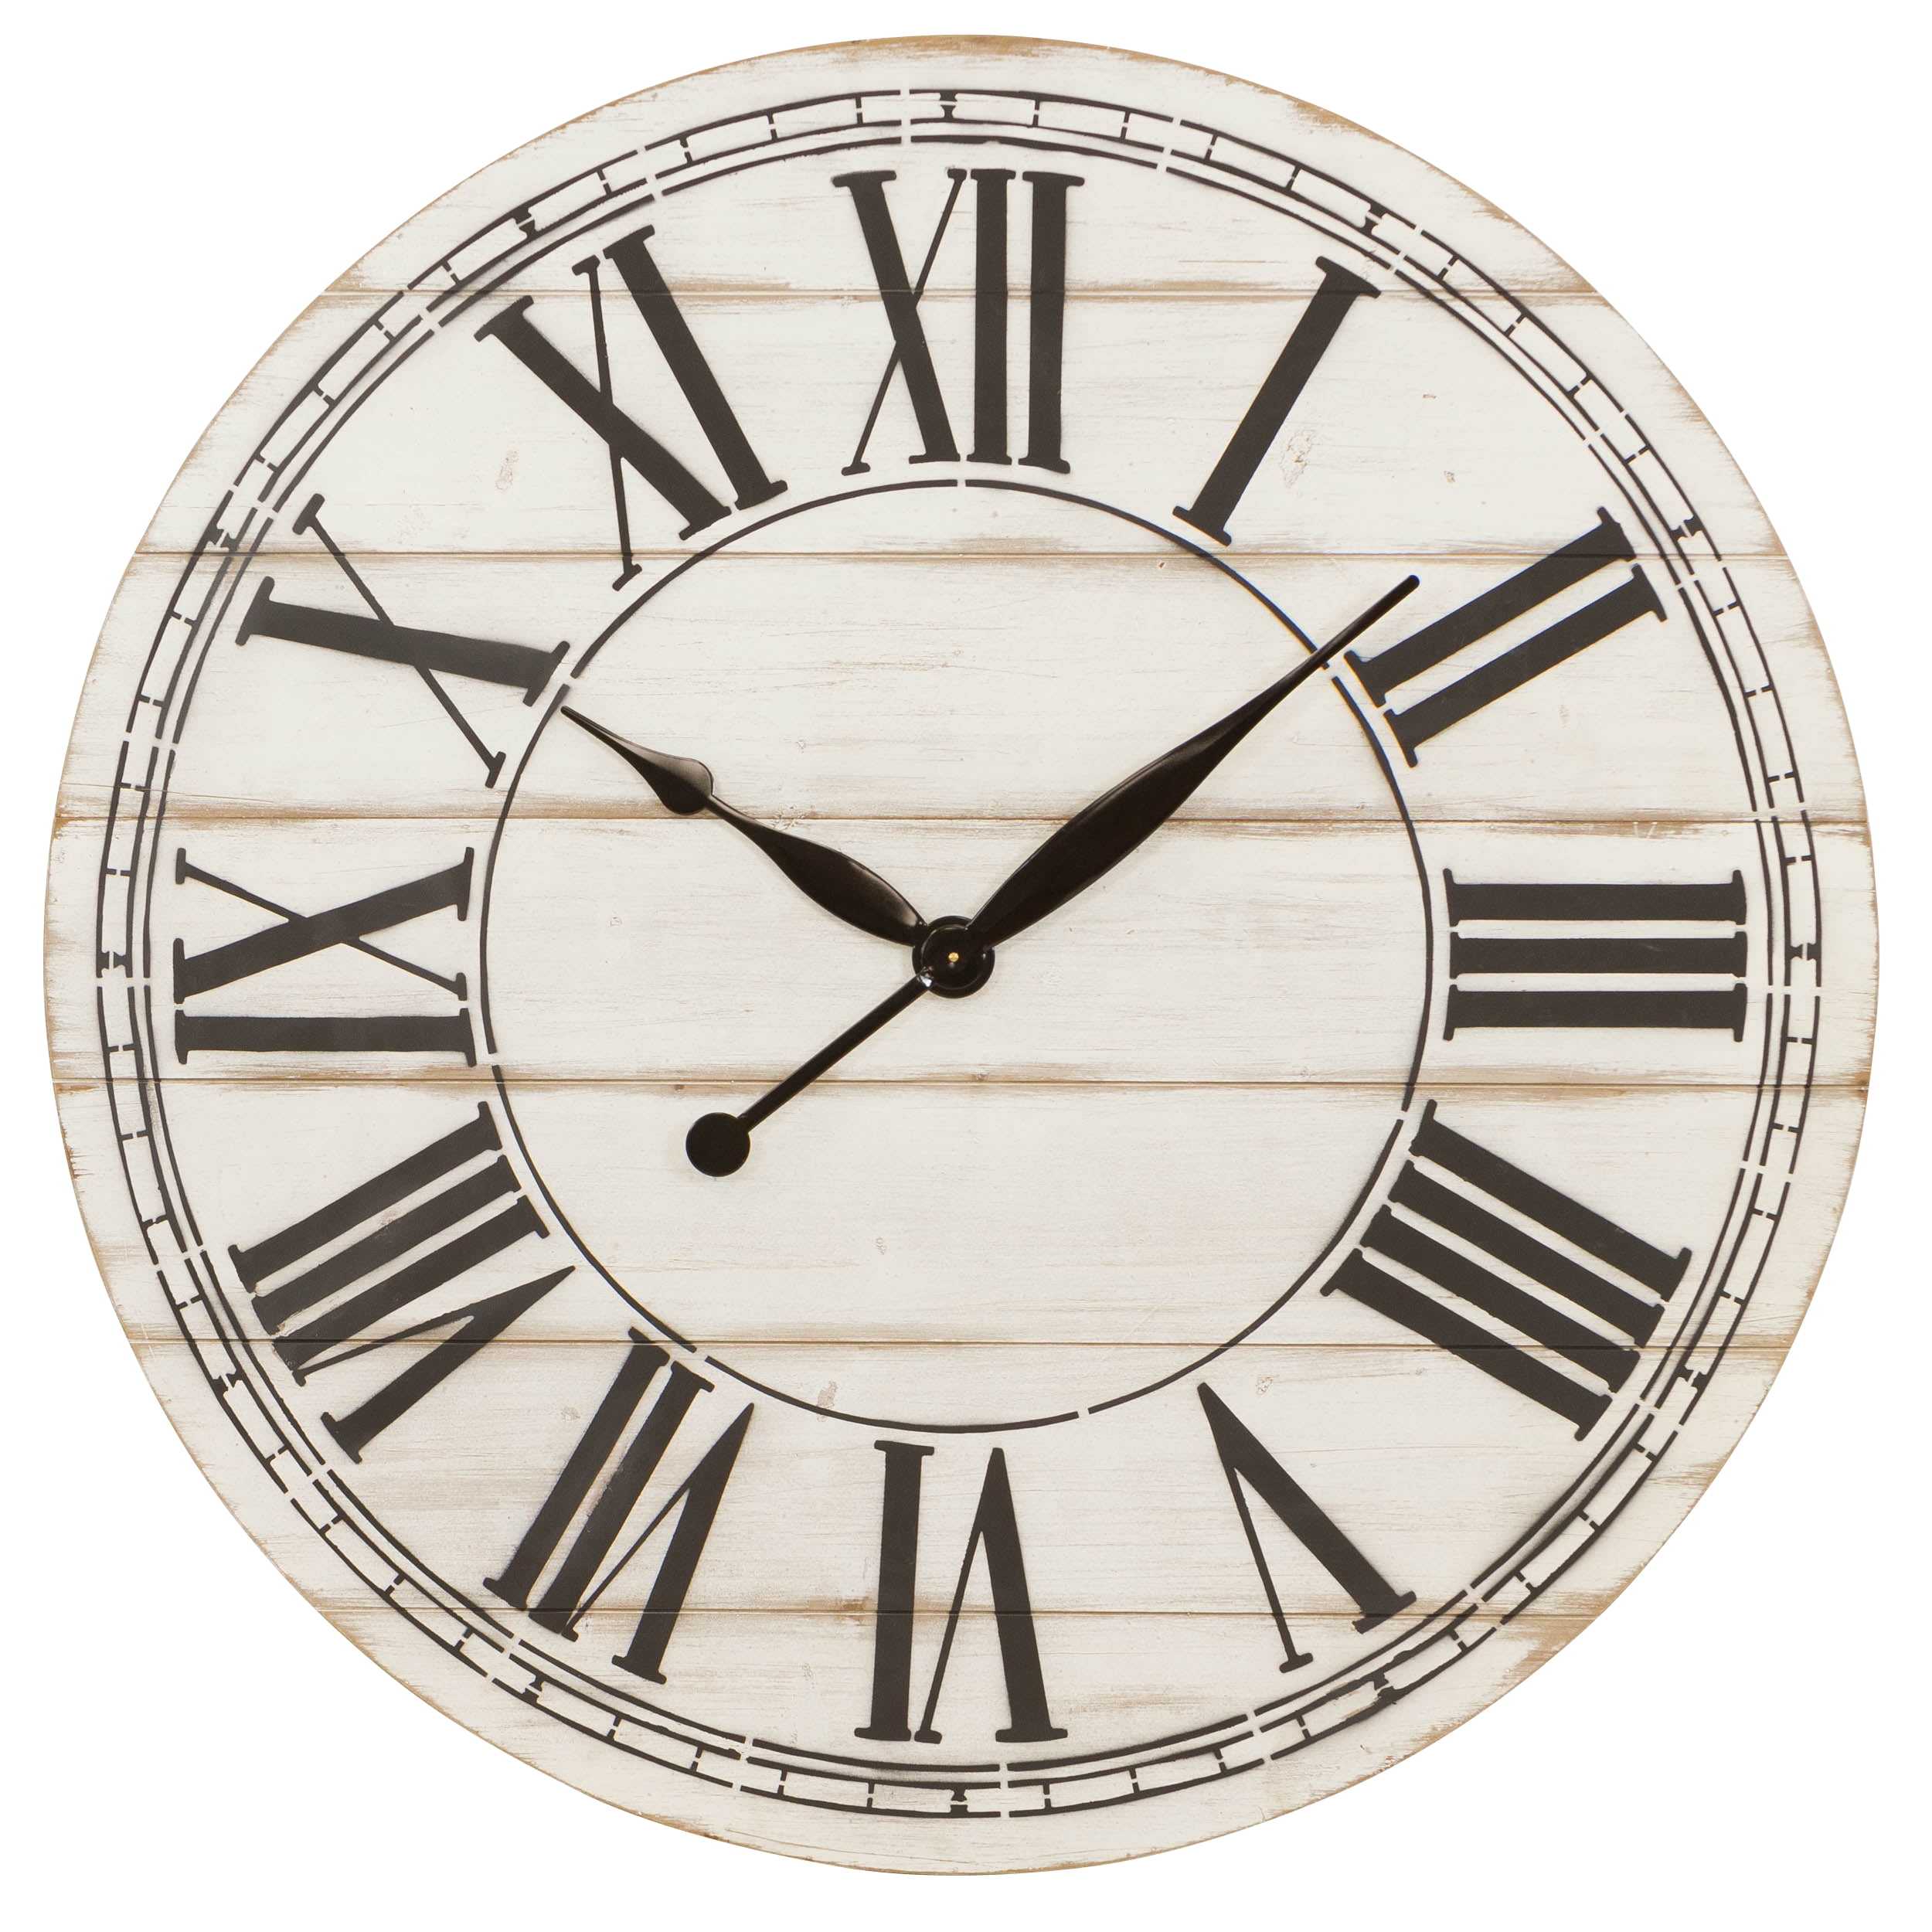 Natural Stain Finish Oversized Wall Mount Round Wooden Plank Clock Kitchen Decor 